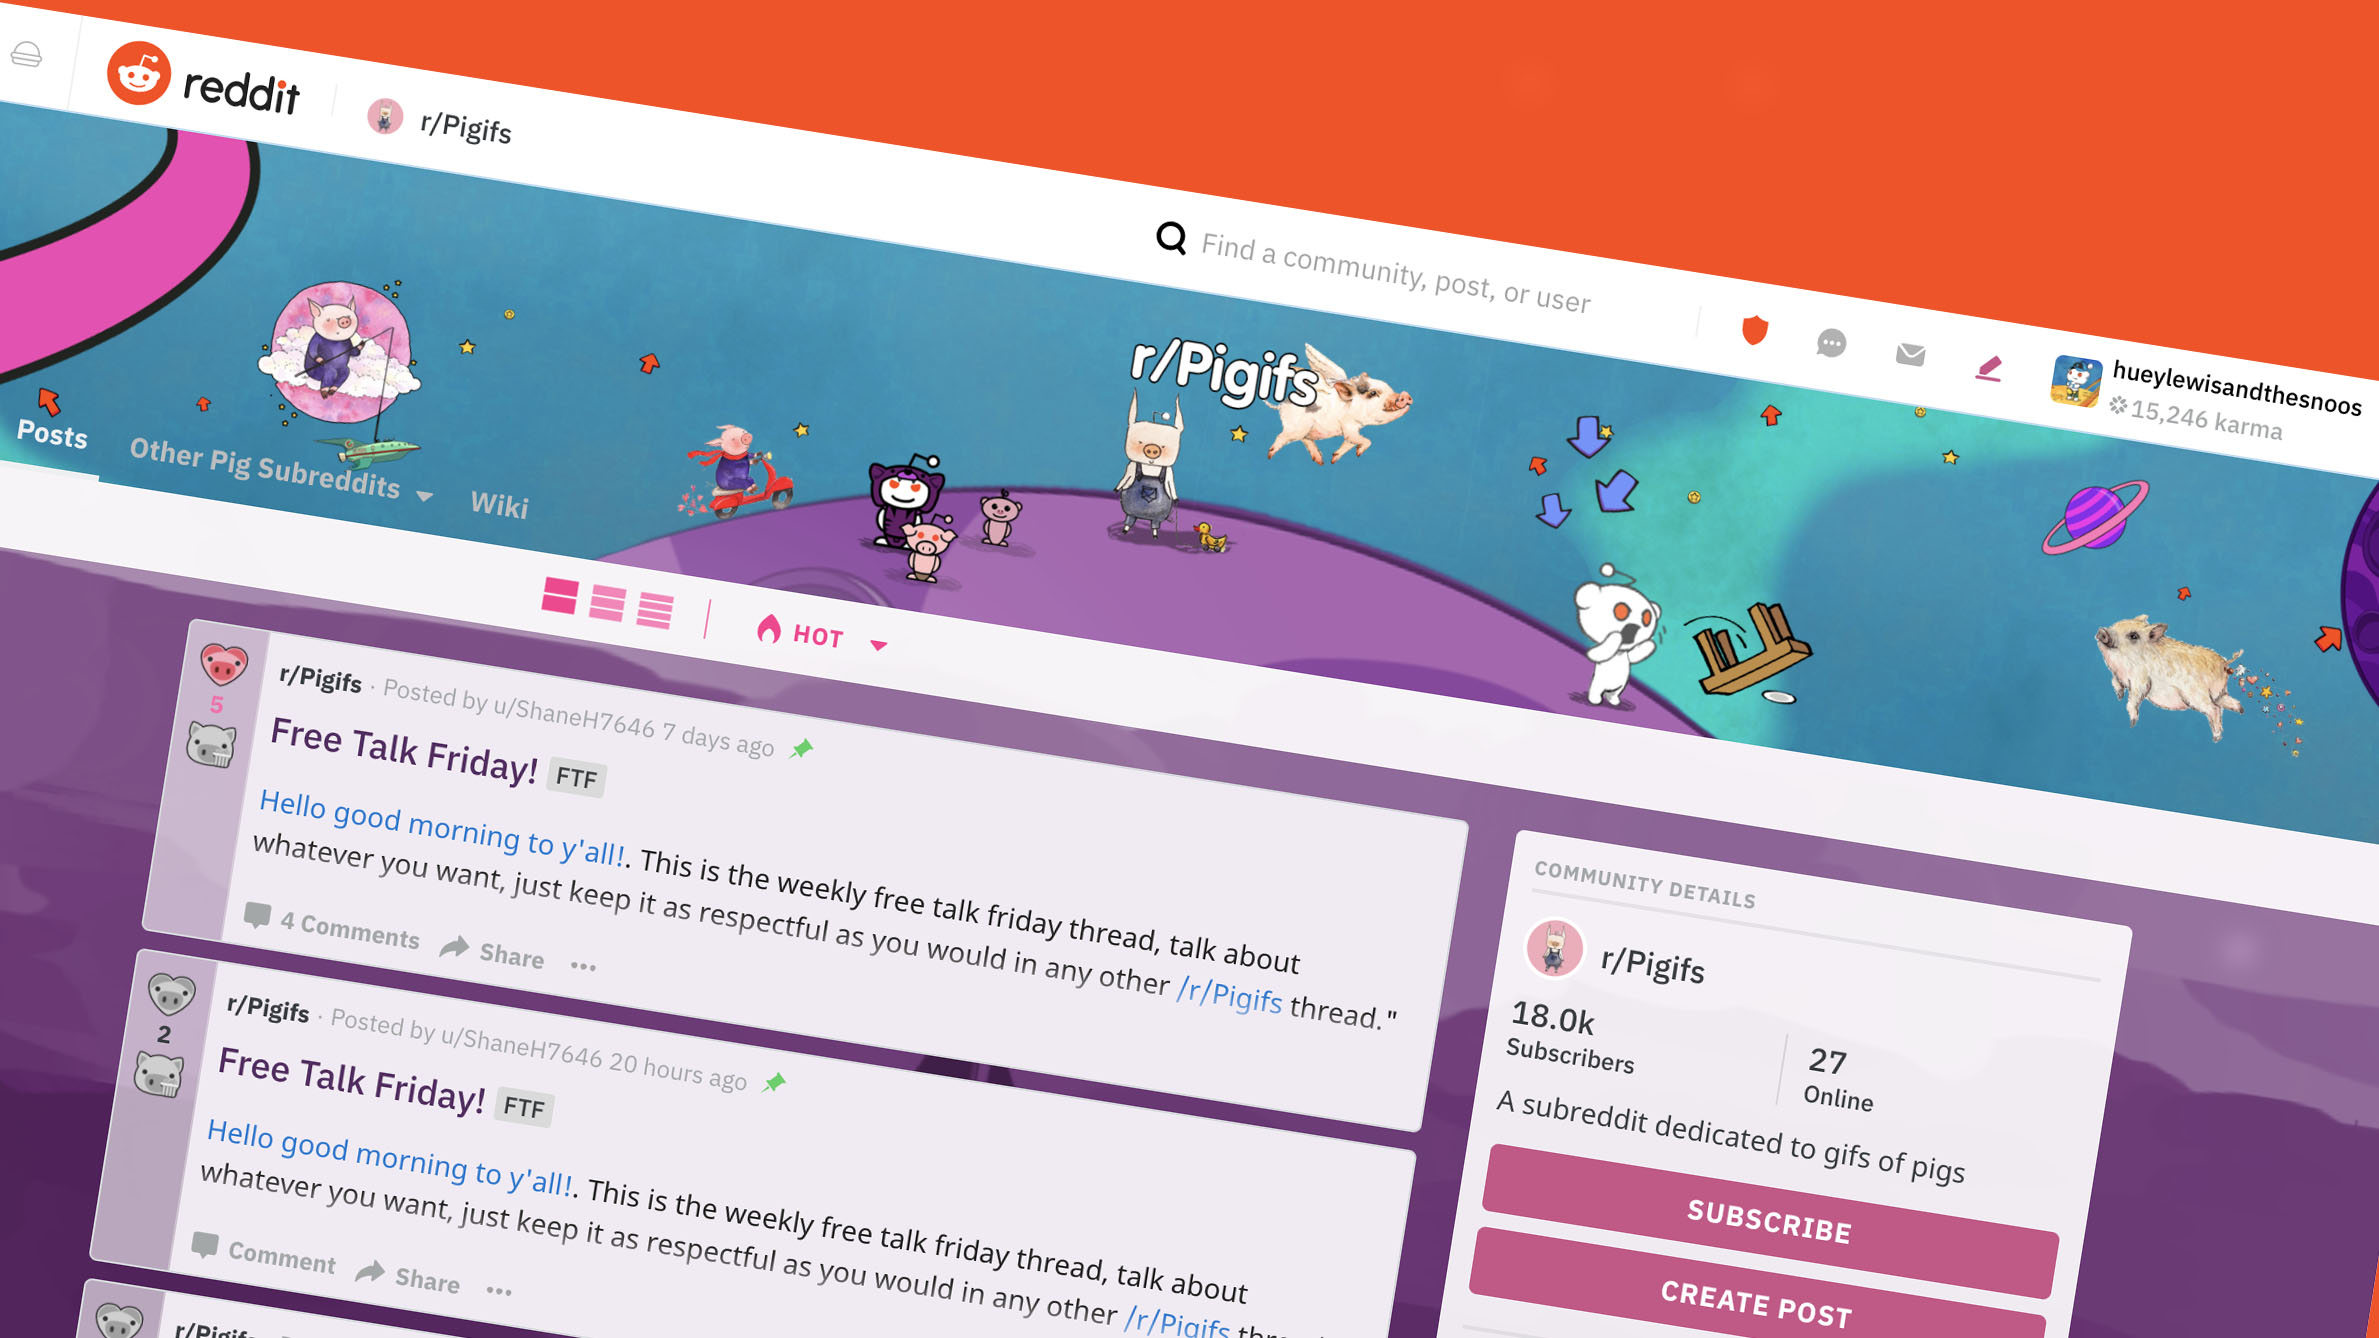 reddit-got-hacked-exposing-the-personal-data-of-select-users-techradar